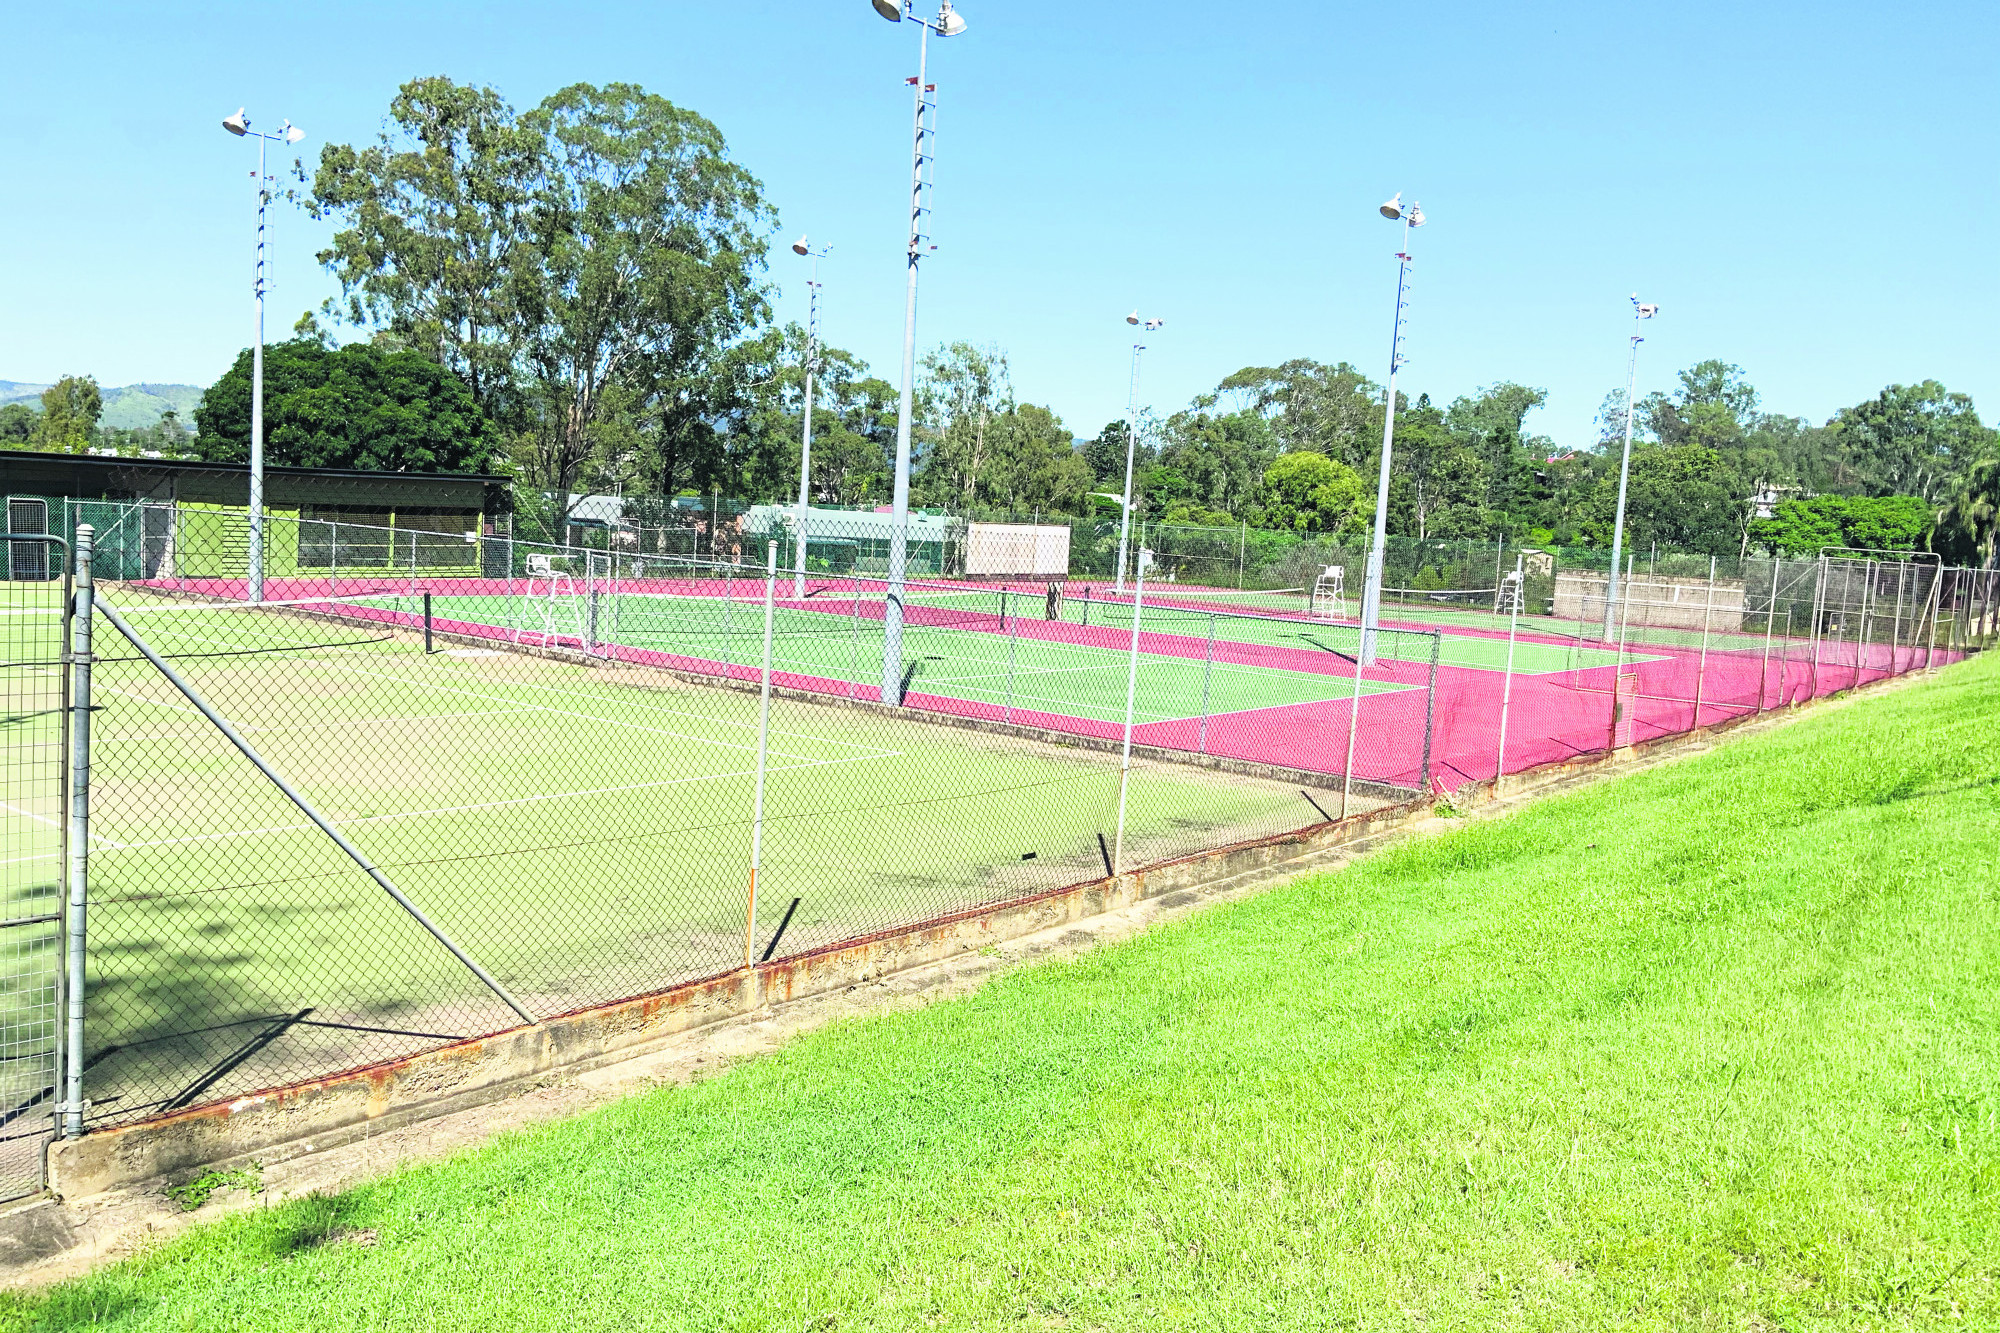 The Kilcoy tennis courts are set to be upgraded, after the club received $35,000 in funding.